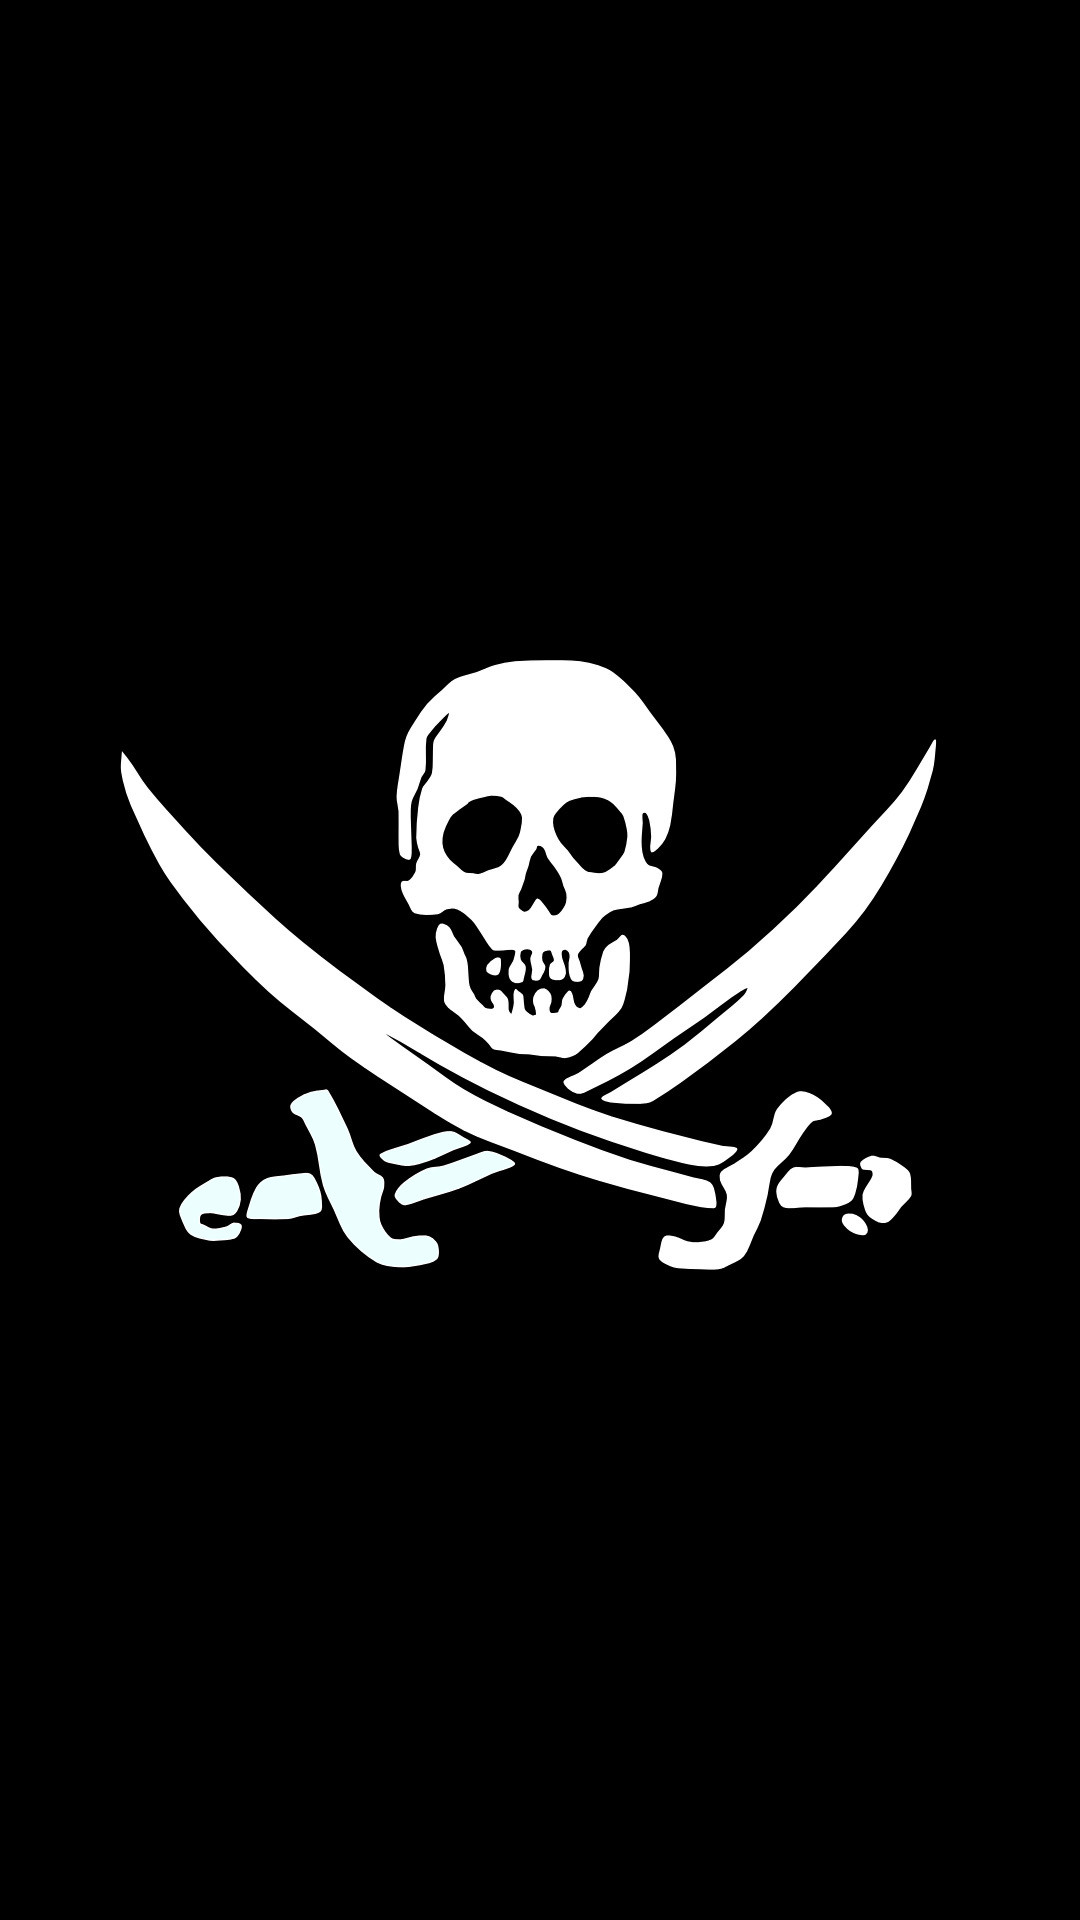 Jolly Roger Pirate Skull Black And White Android Wallpaper - Jolly Roger Black Background - HD Wallpaper 